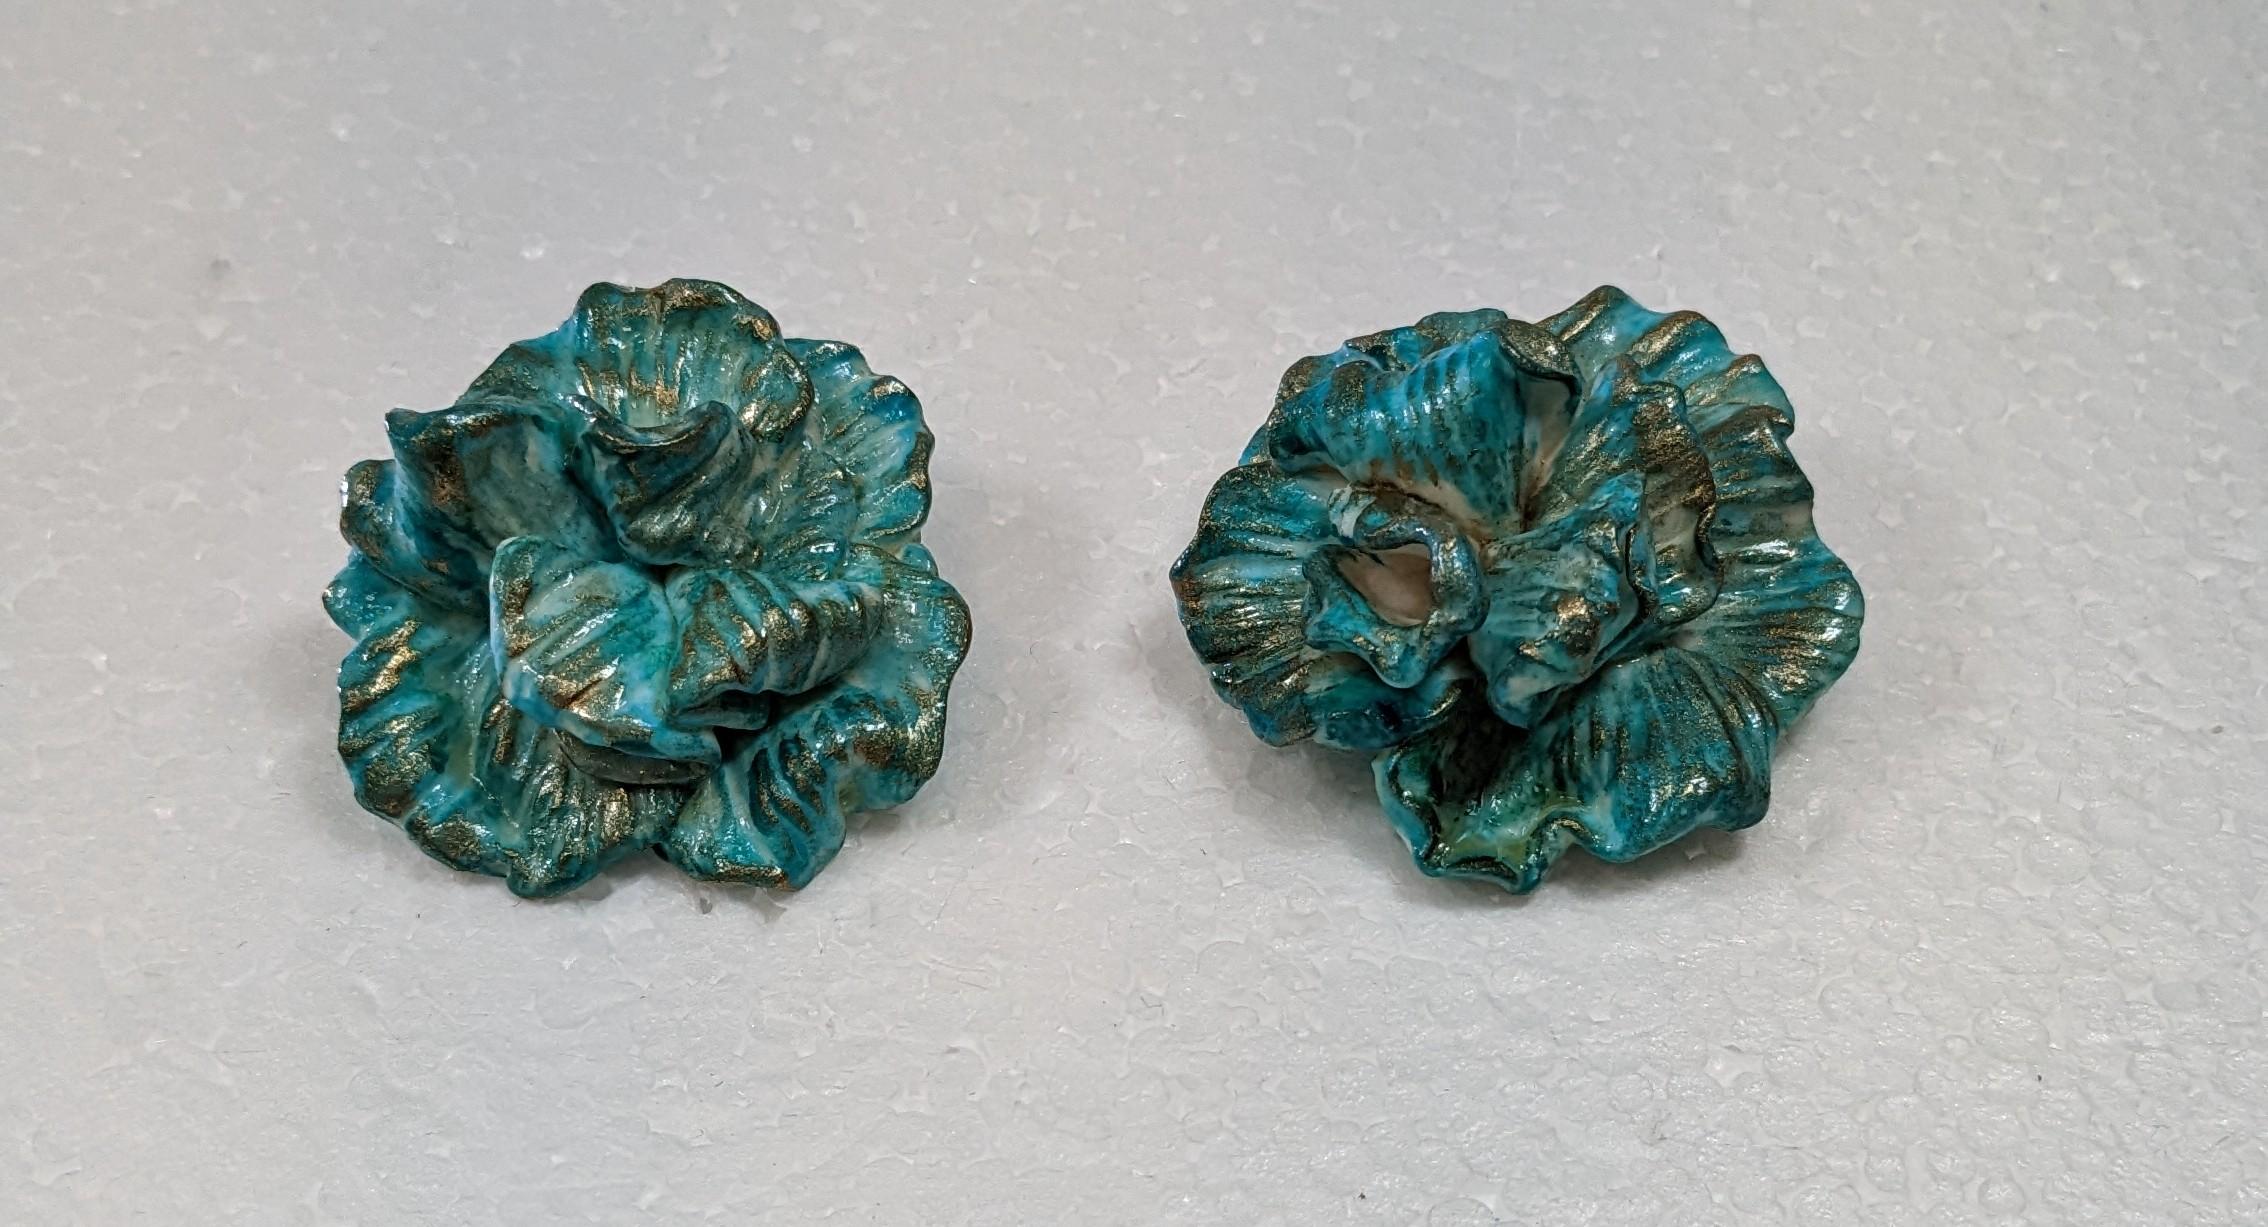  Turquoise and Gold and White Veins Camelia Polymer  Clay Earrings with golplated silver closure

Diameter: 4 cm
Weight: 14,5 grams
Color  Turquose, White and Gold
Handmade




Pradera Fashion Division  is specialized in European Fashion designers,